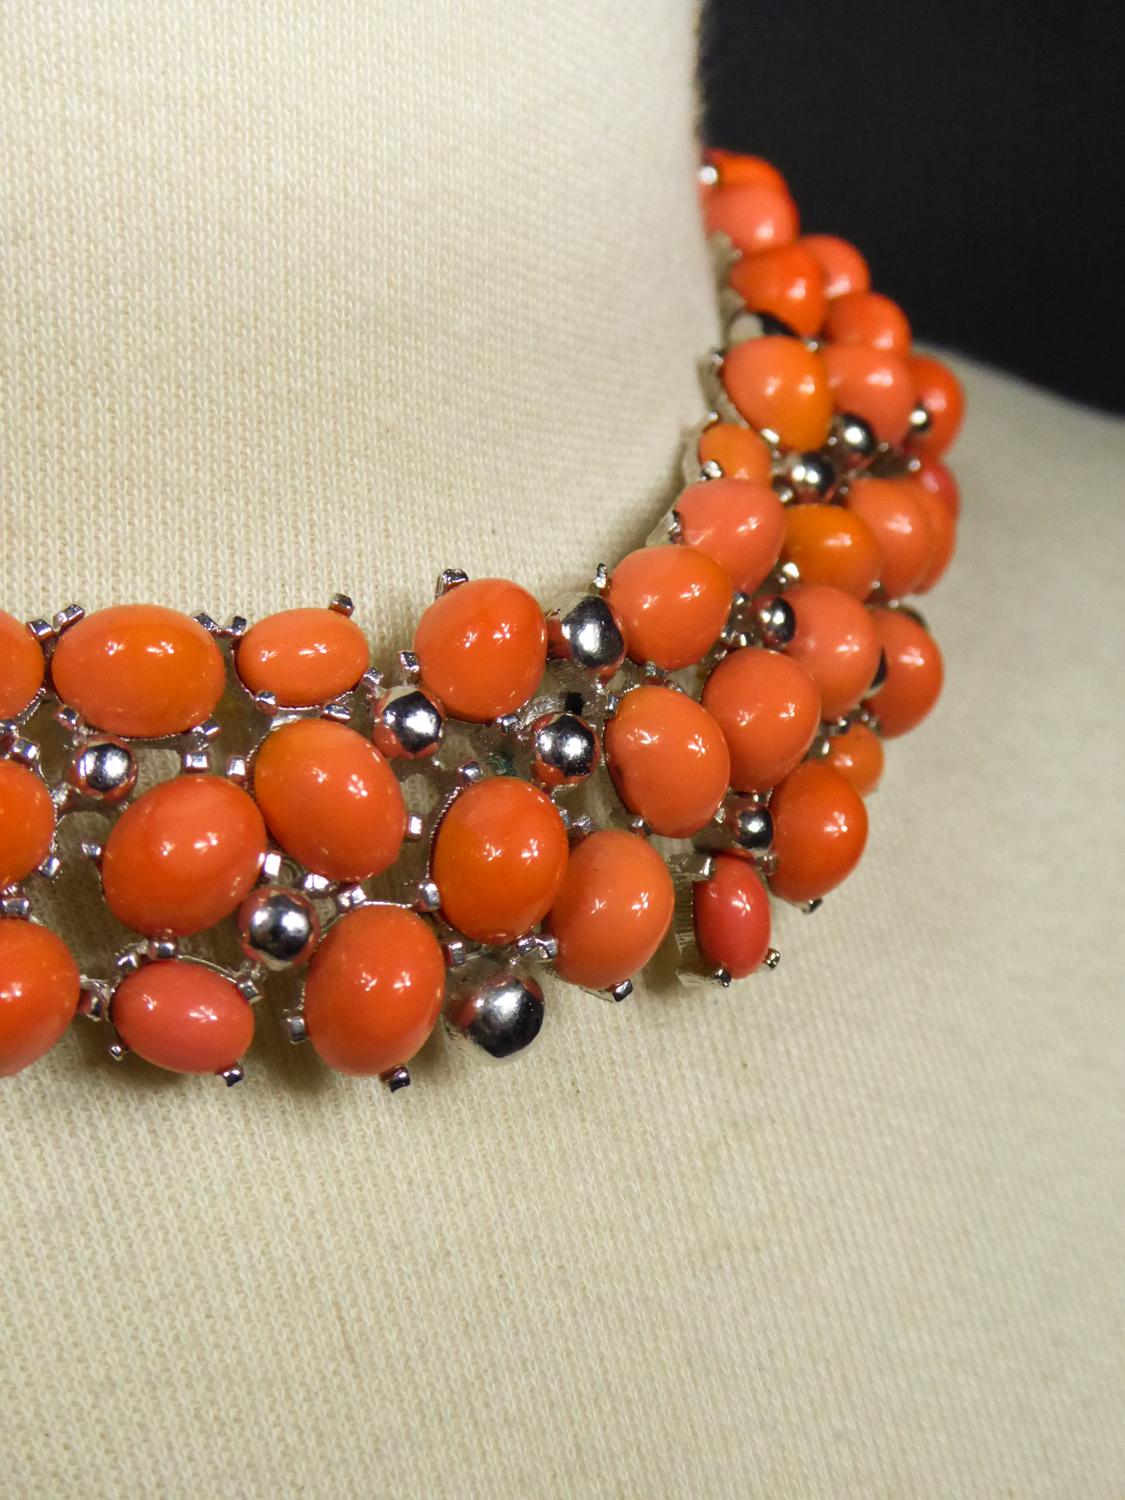 A Carven Haute Couture Necklace in glass Beads Circa 1960/1970 10